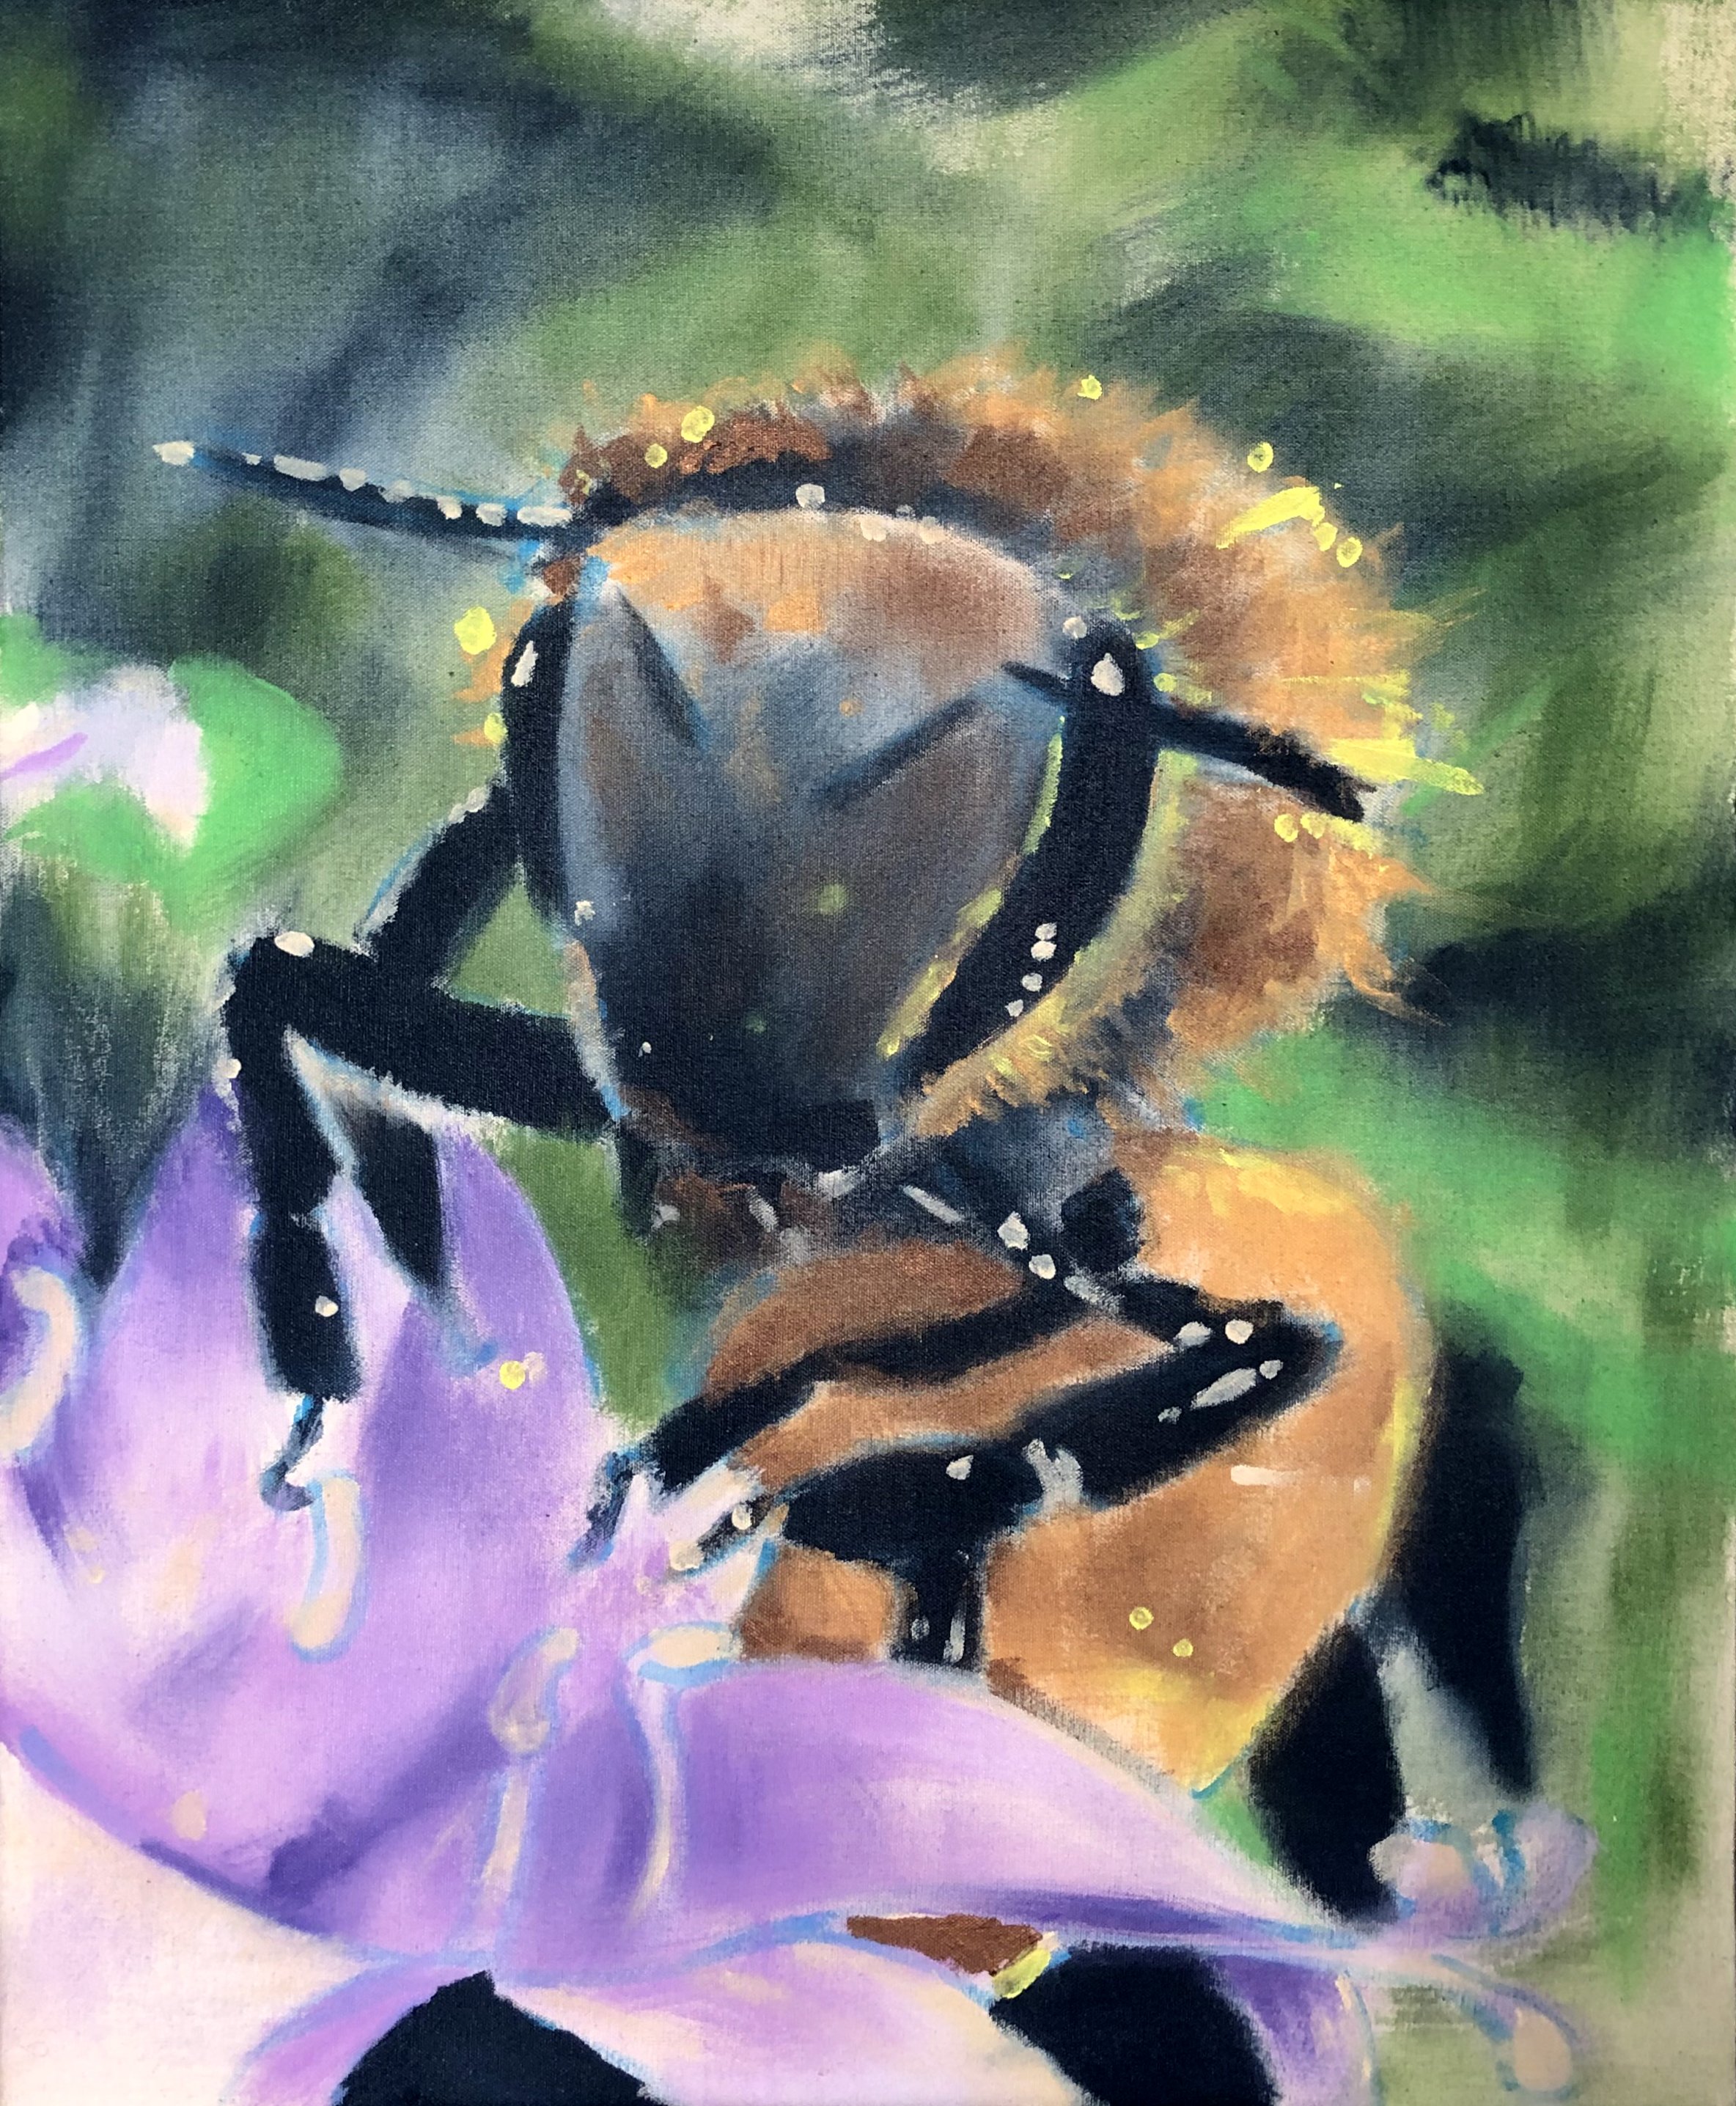   Bee  acrylic on raw canvas. 2020    owned by Private Collector    exhibited -  Ocala City Hall during A Floral Retrospective 2022; Daggerwing Nature Center, Boca Raton, FL 2020  